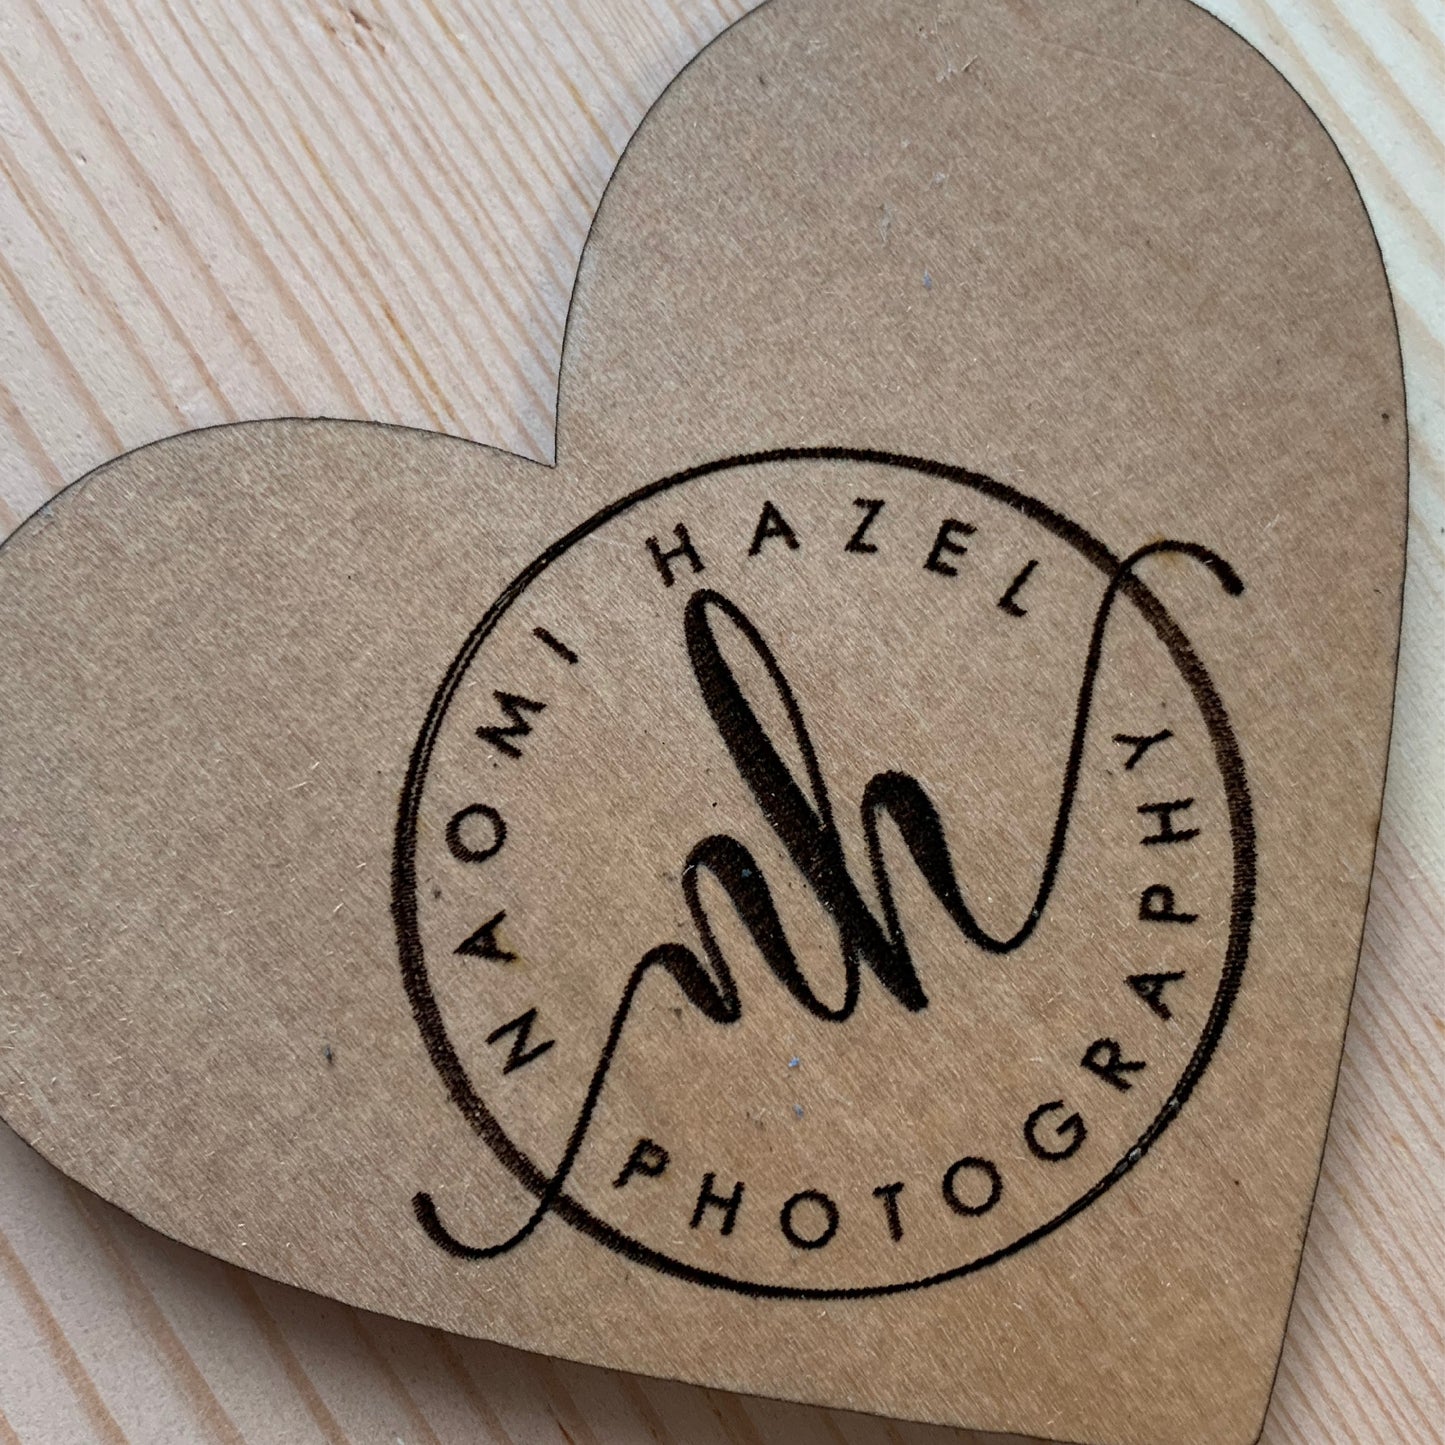 Heart Wood product tags, Set of 10 custom product tags, party favor tags, photography wood tag, wood tags, product tags